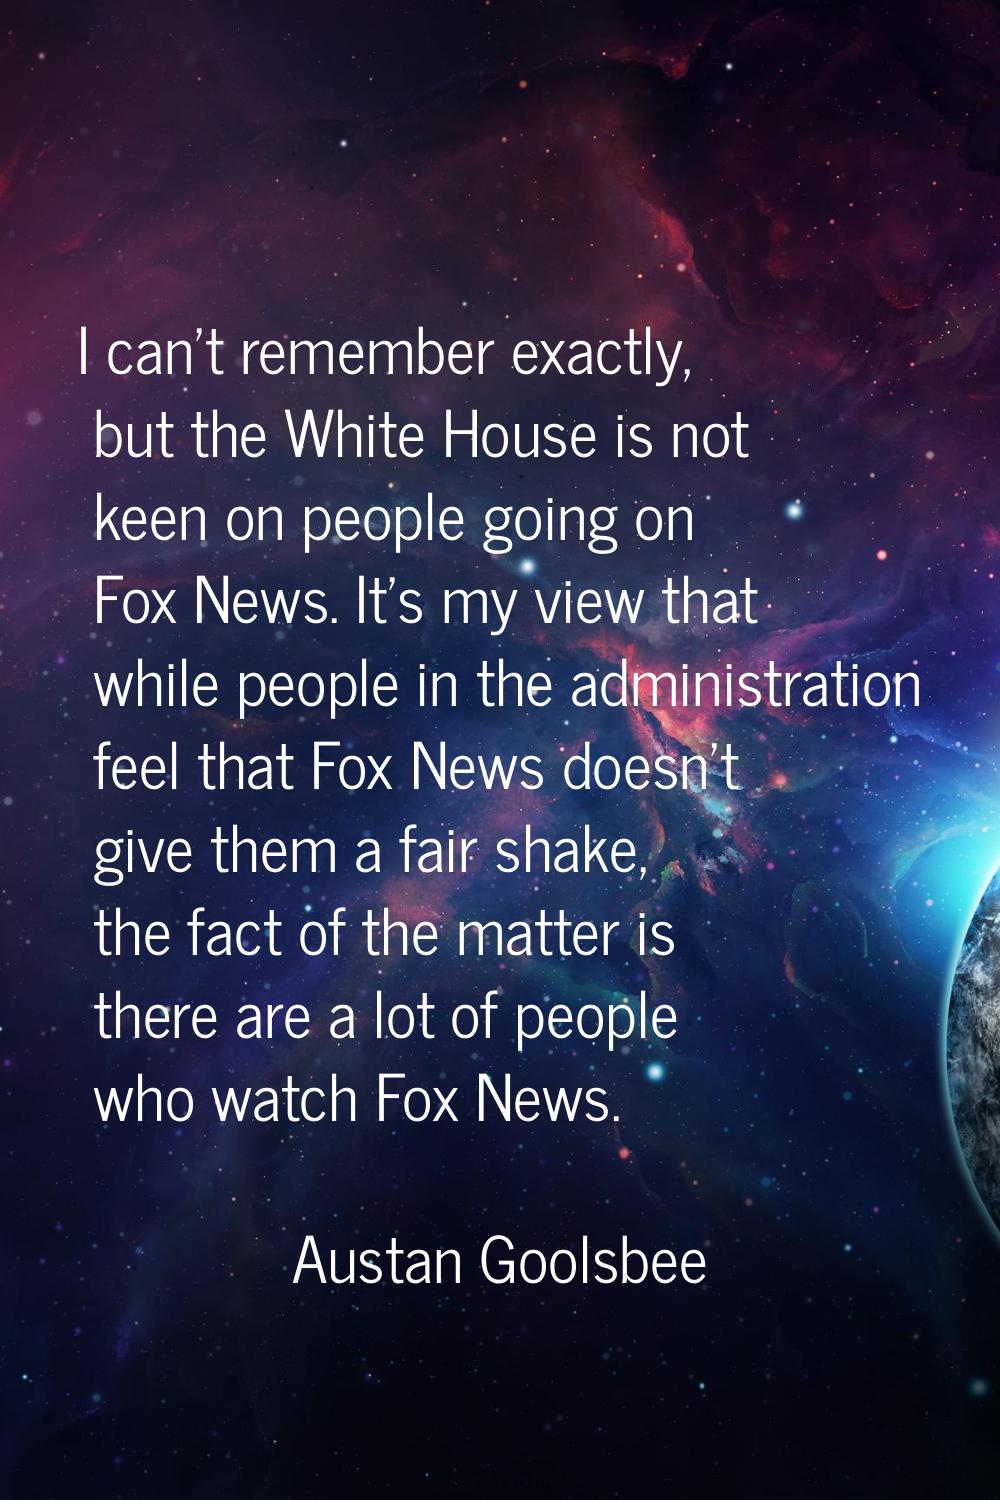 I can't remember exactly, but the White House is not keen on people going on Fox News. It's my view